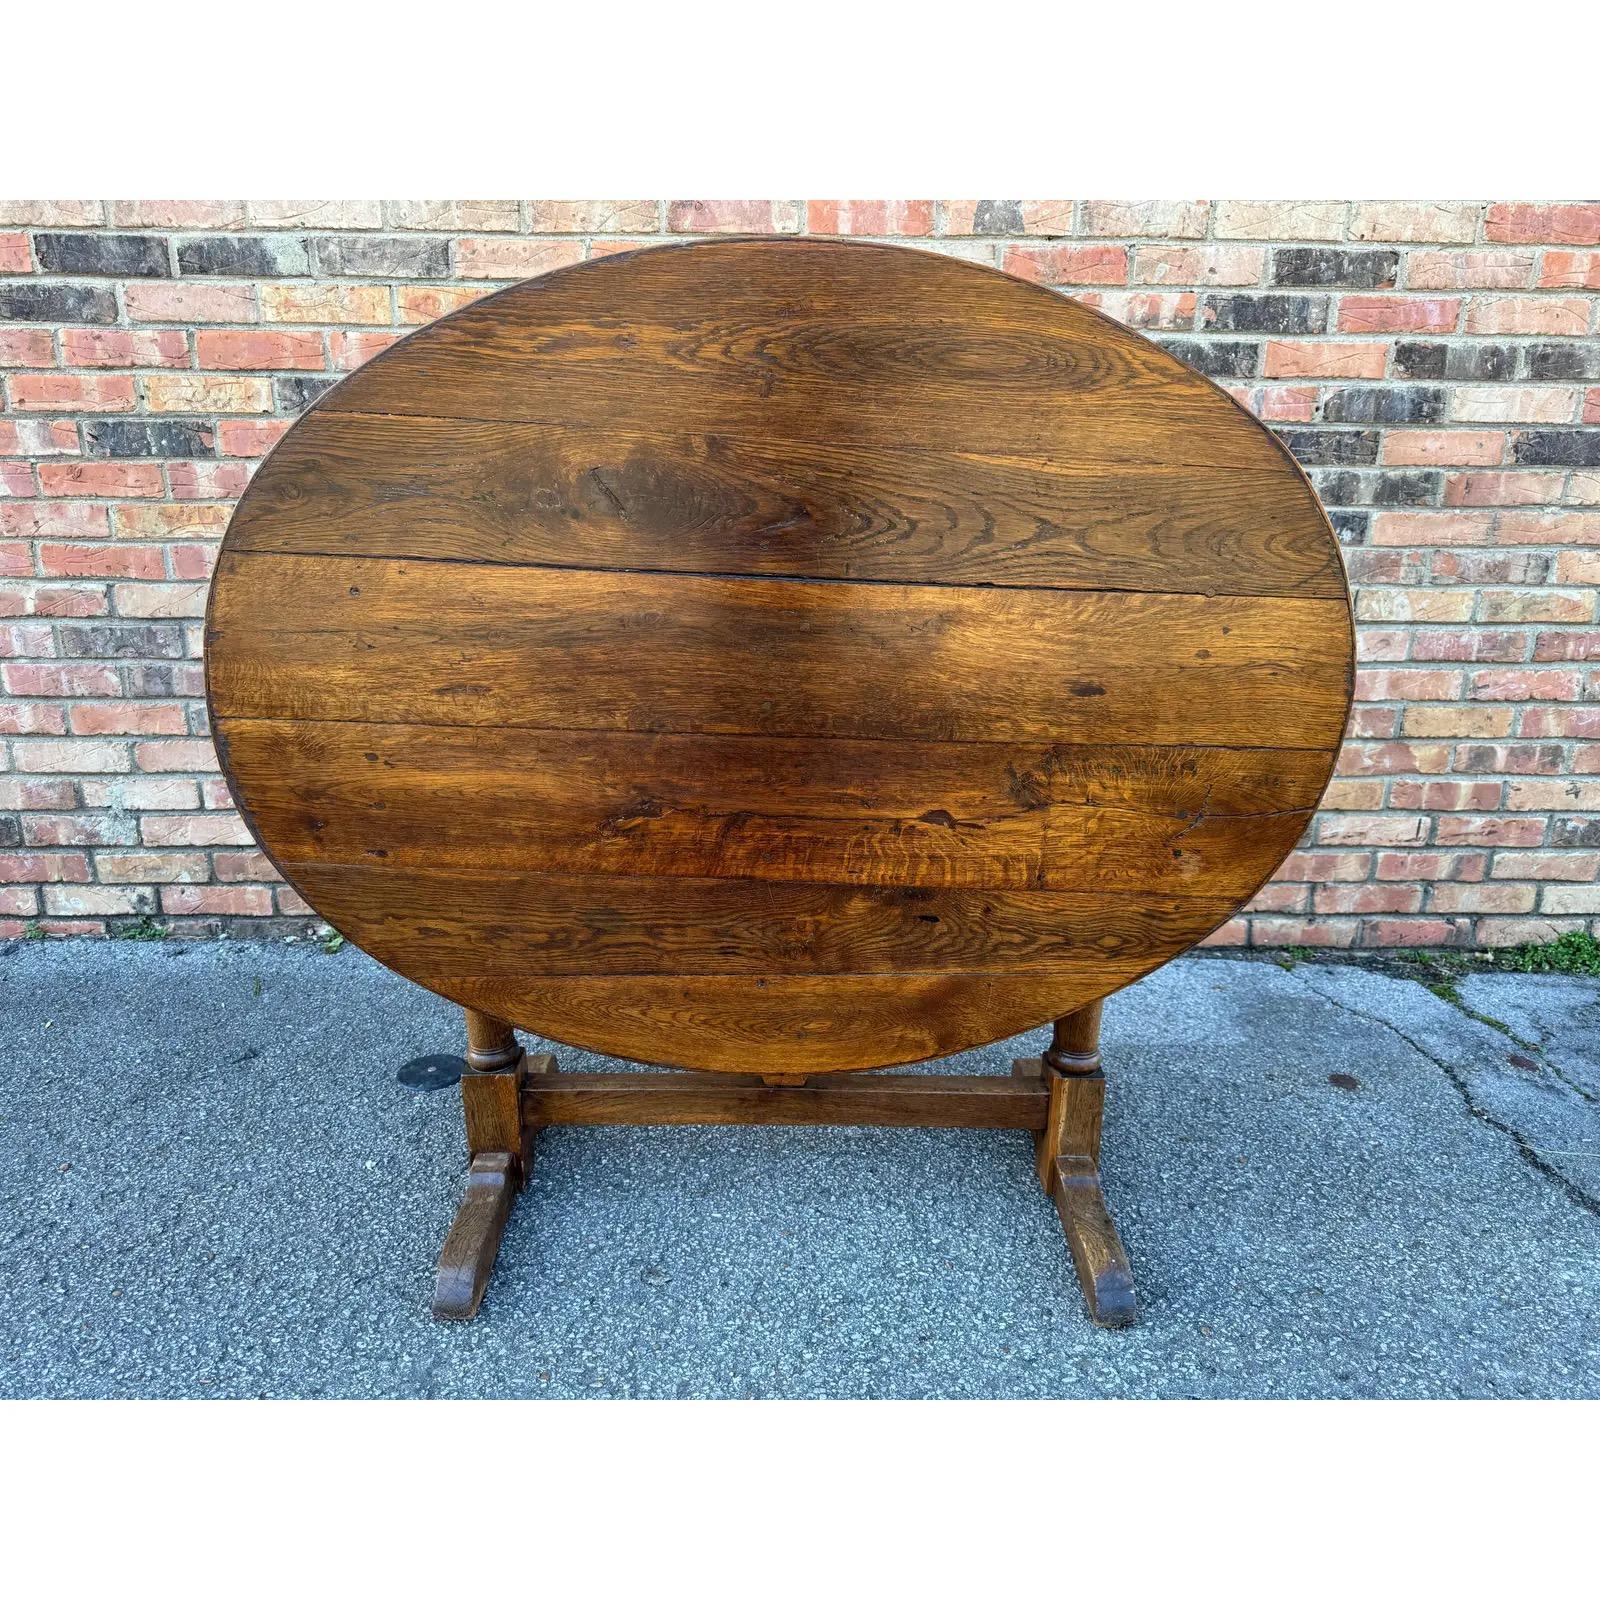 This 19th-century French wine table exudes timeless elegance, crafted with intricate detailing and deep rich wood. Its refined design and sturdy construction make it a perfect addition to any home, offering a touch of classic French charm. Elevate